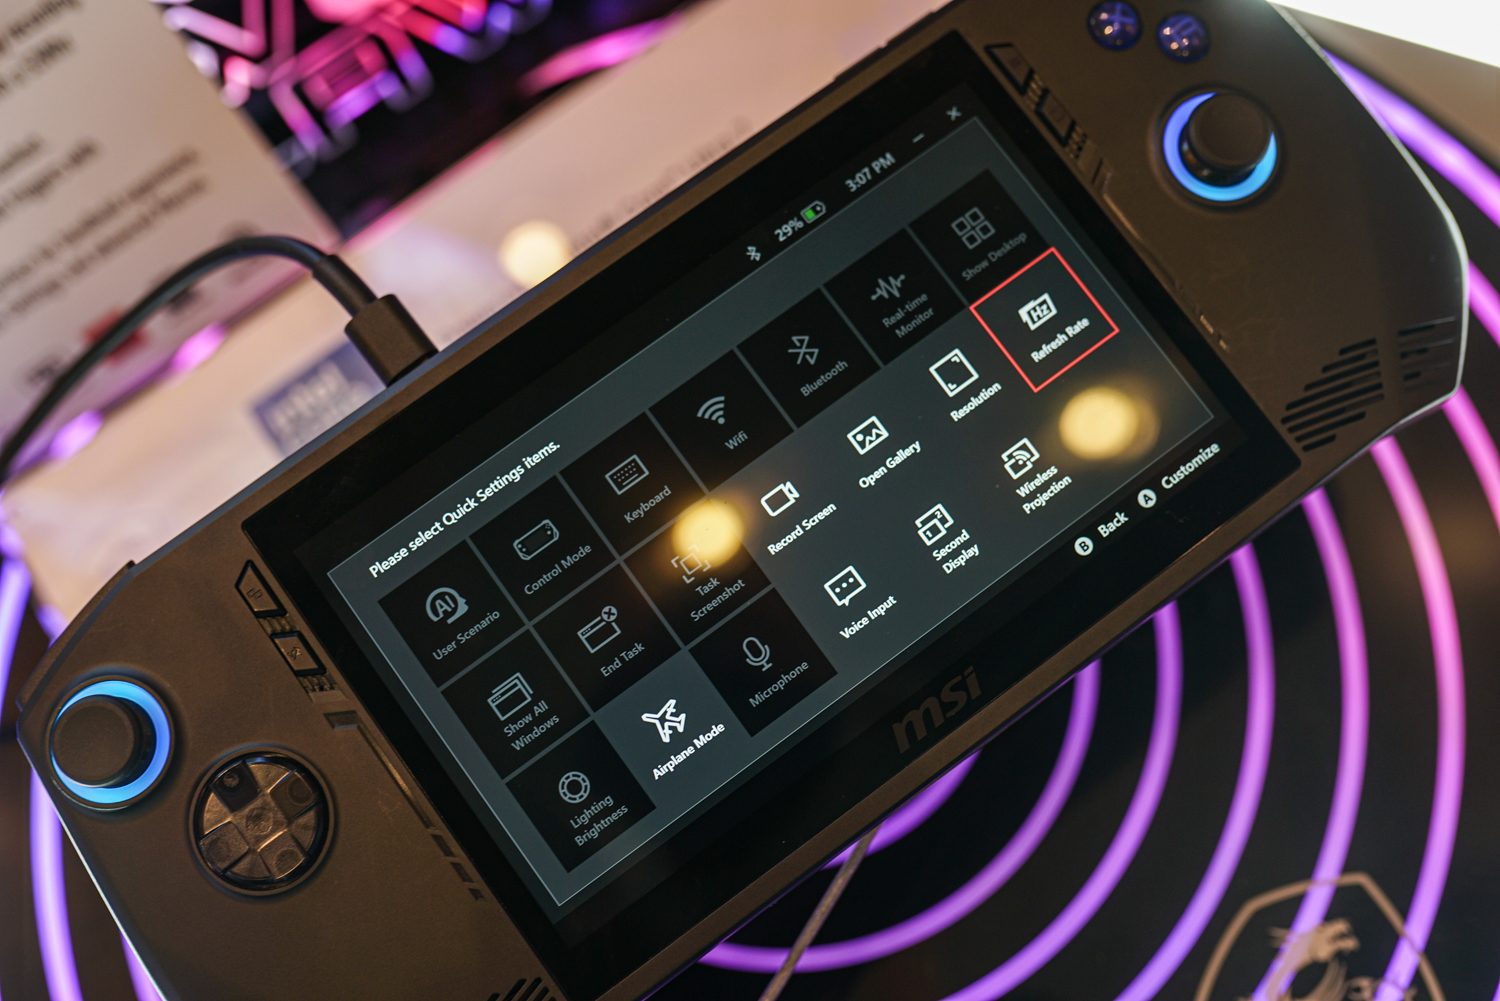 Overlay options on the MSI Claw handheld.